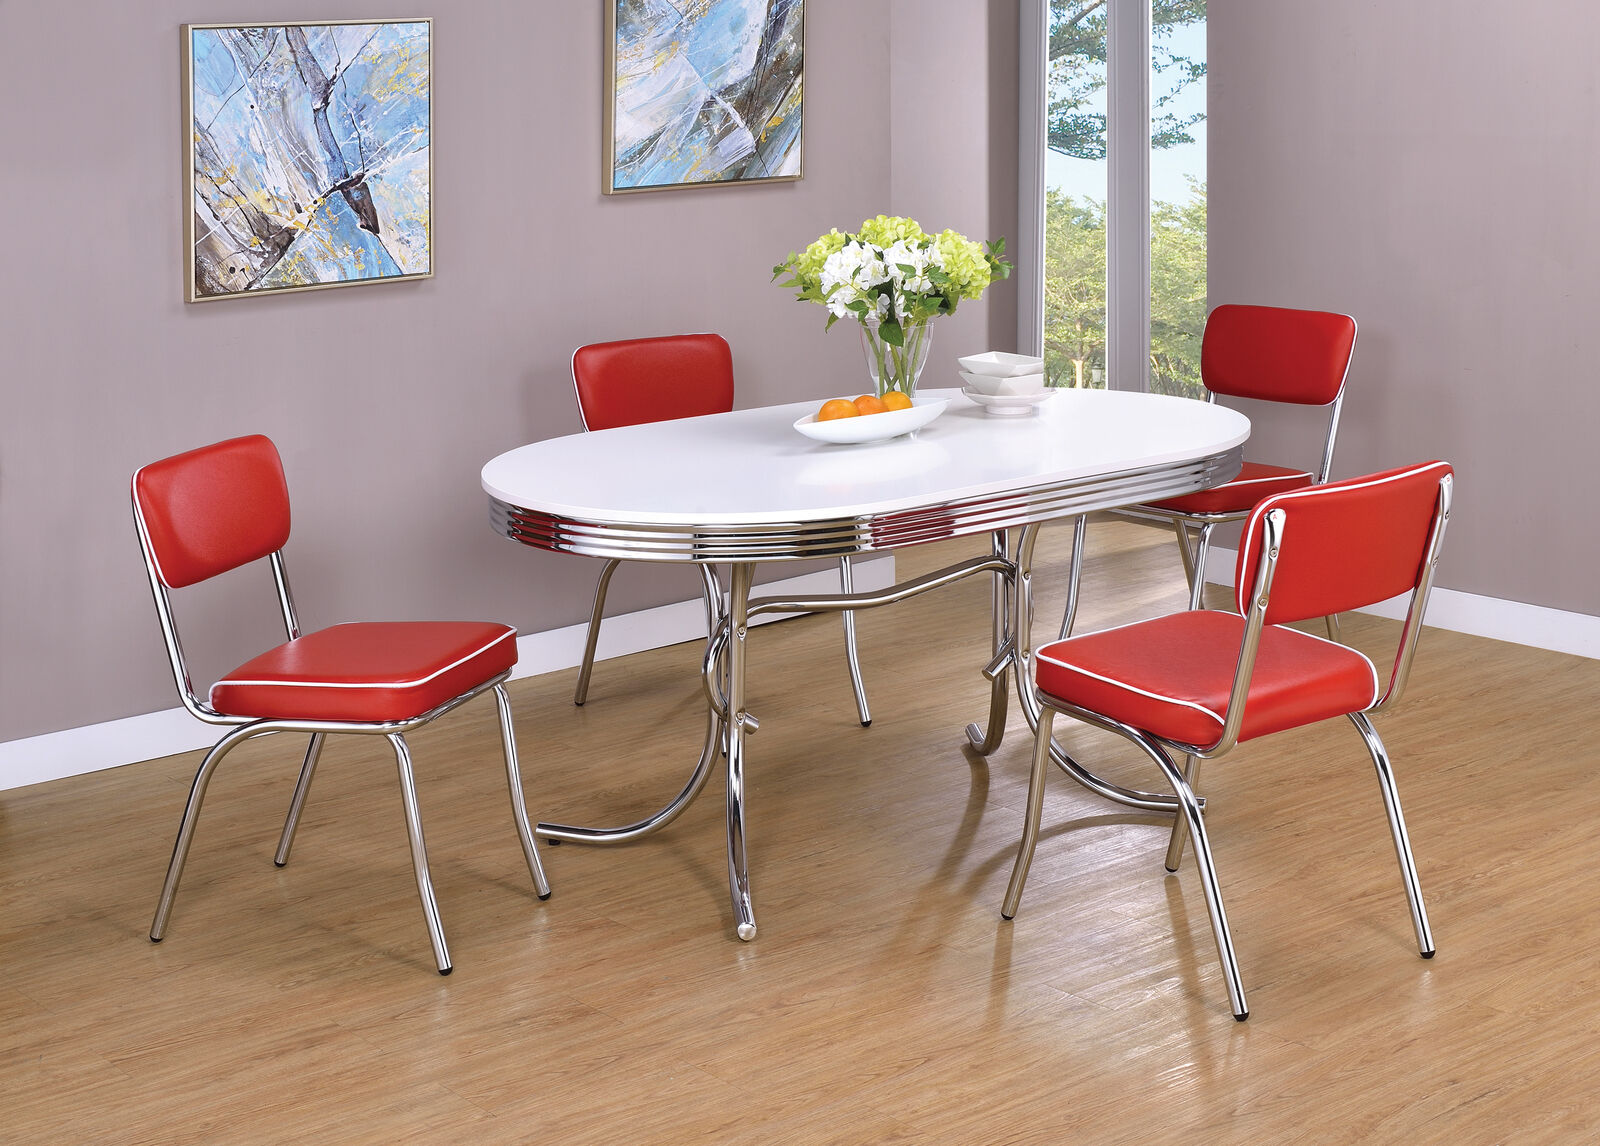 Coaster Cleveland 5 Piece Retro Oval Dining Set in White and Red